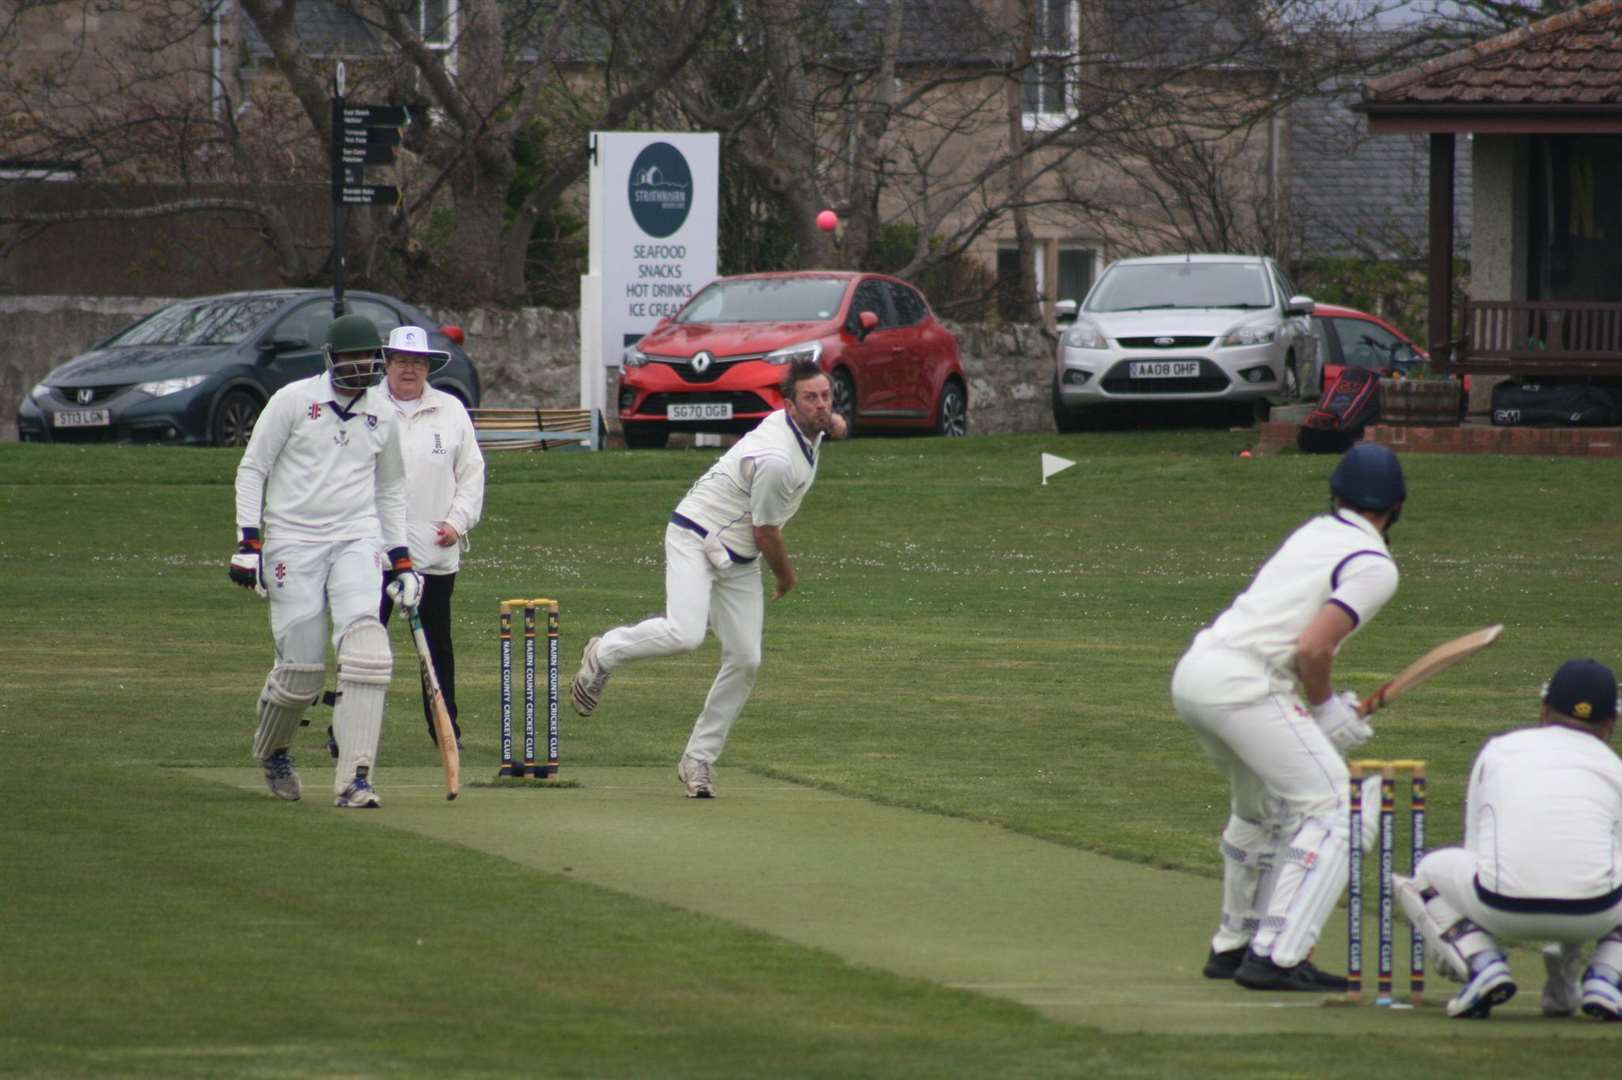 Nairn County Cricket Club played their first pre-season friendly of 2022 against the 40 Club - losing by 30 runs.